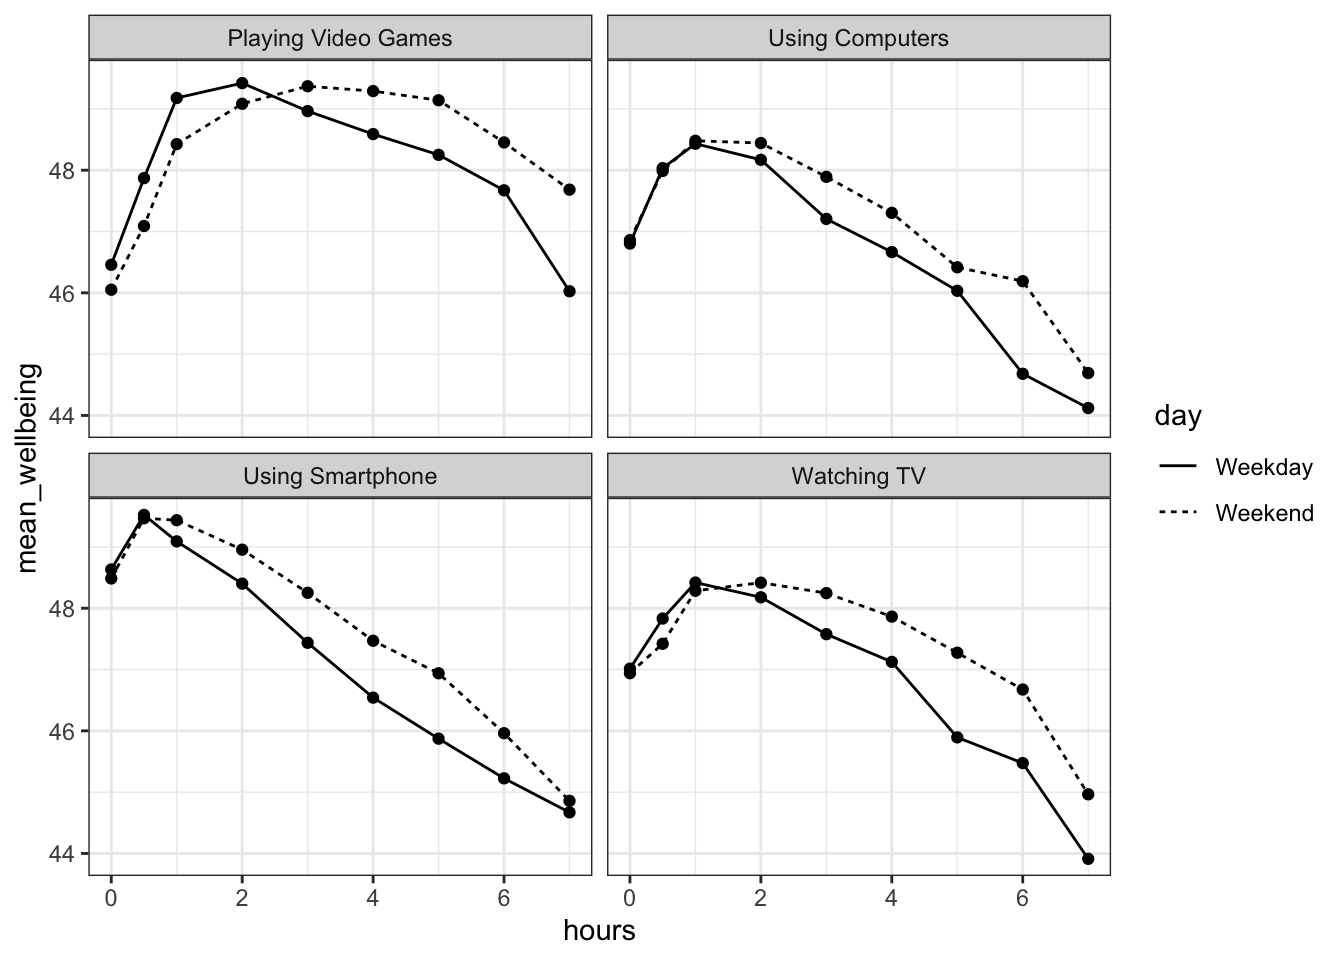 Scatterplot showing the relationship between screen time and mean well-being across four technologies for Weekdays and Weekends